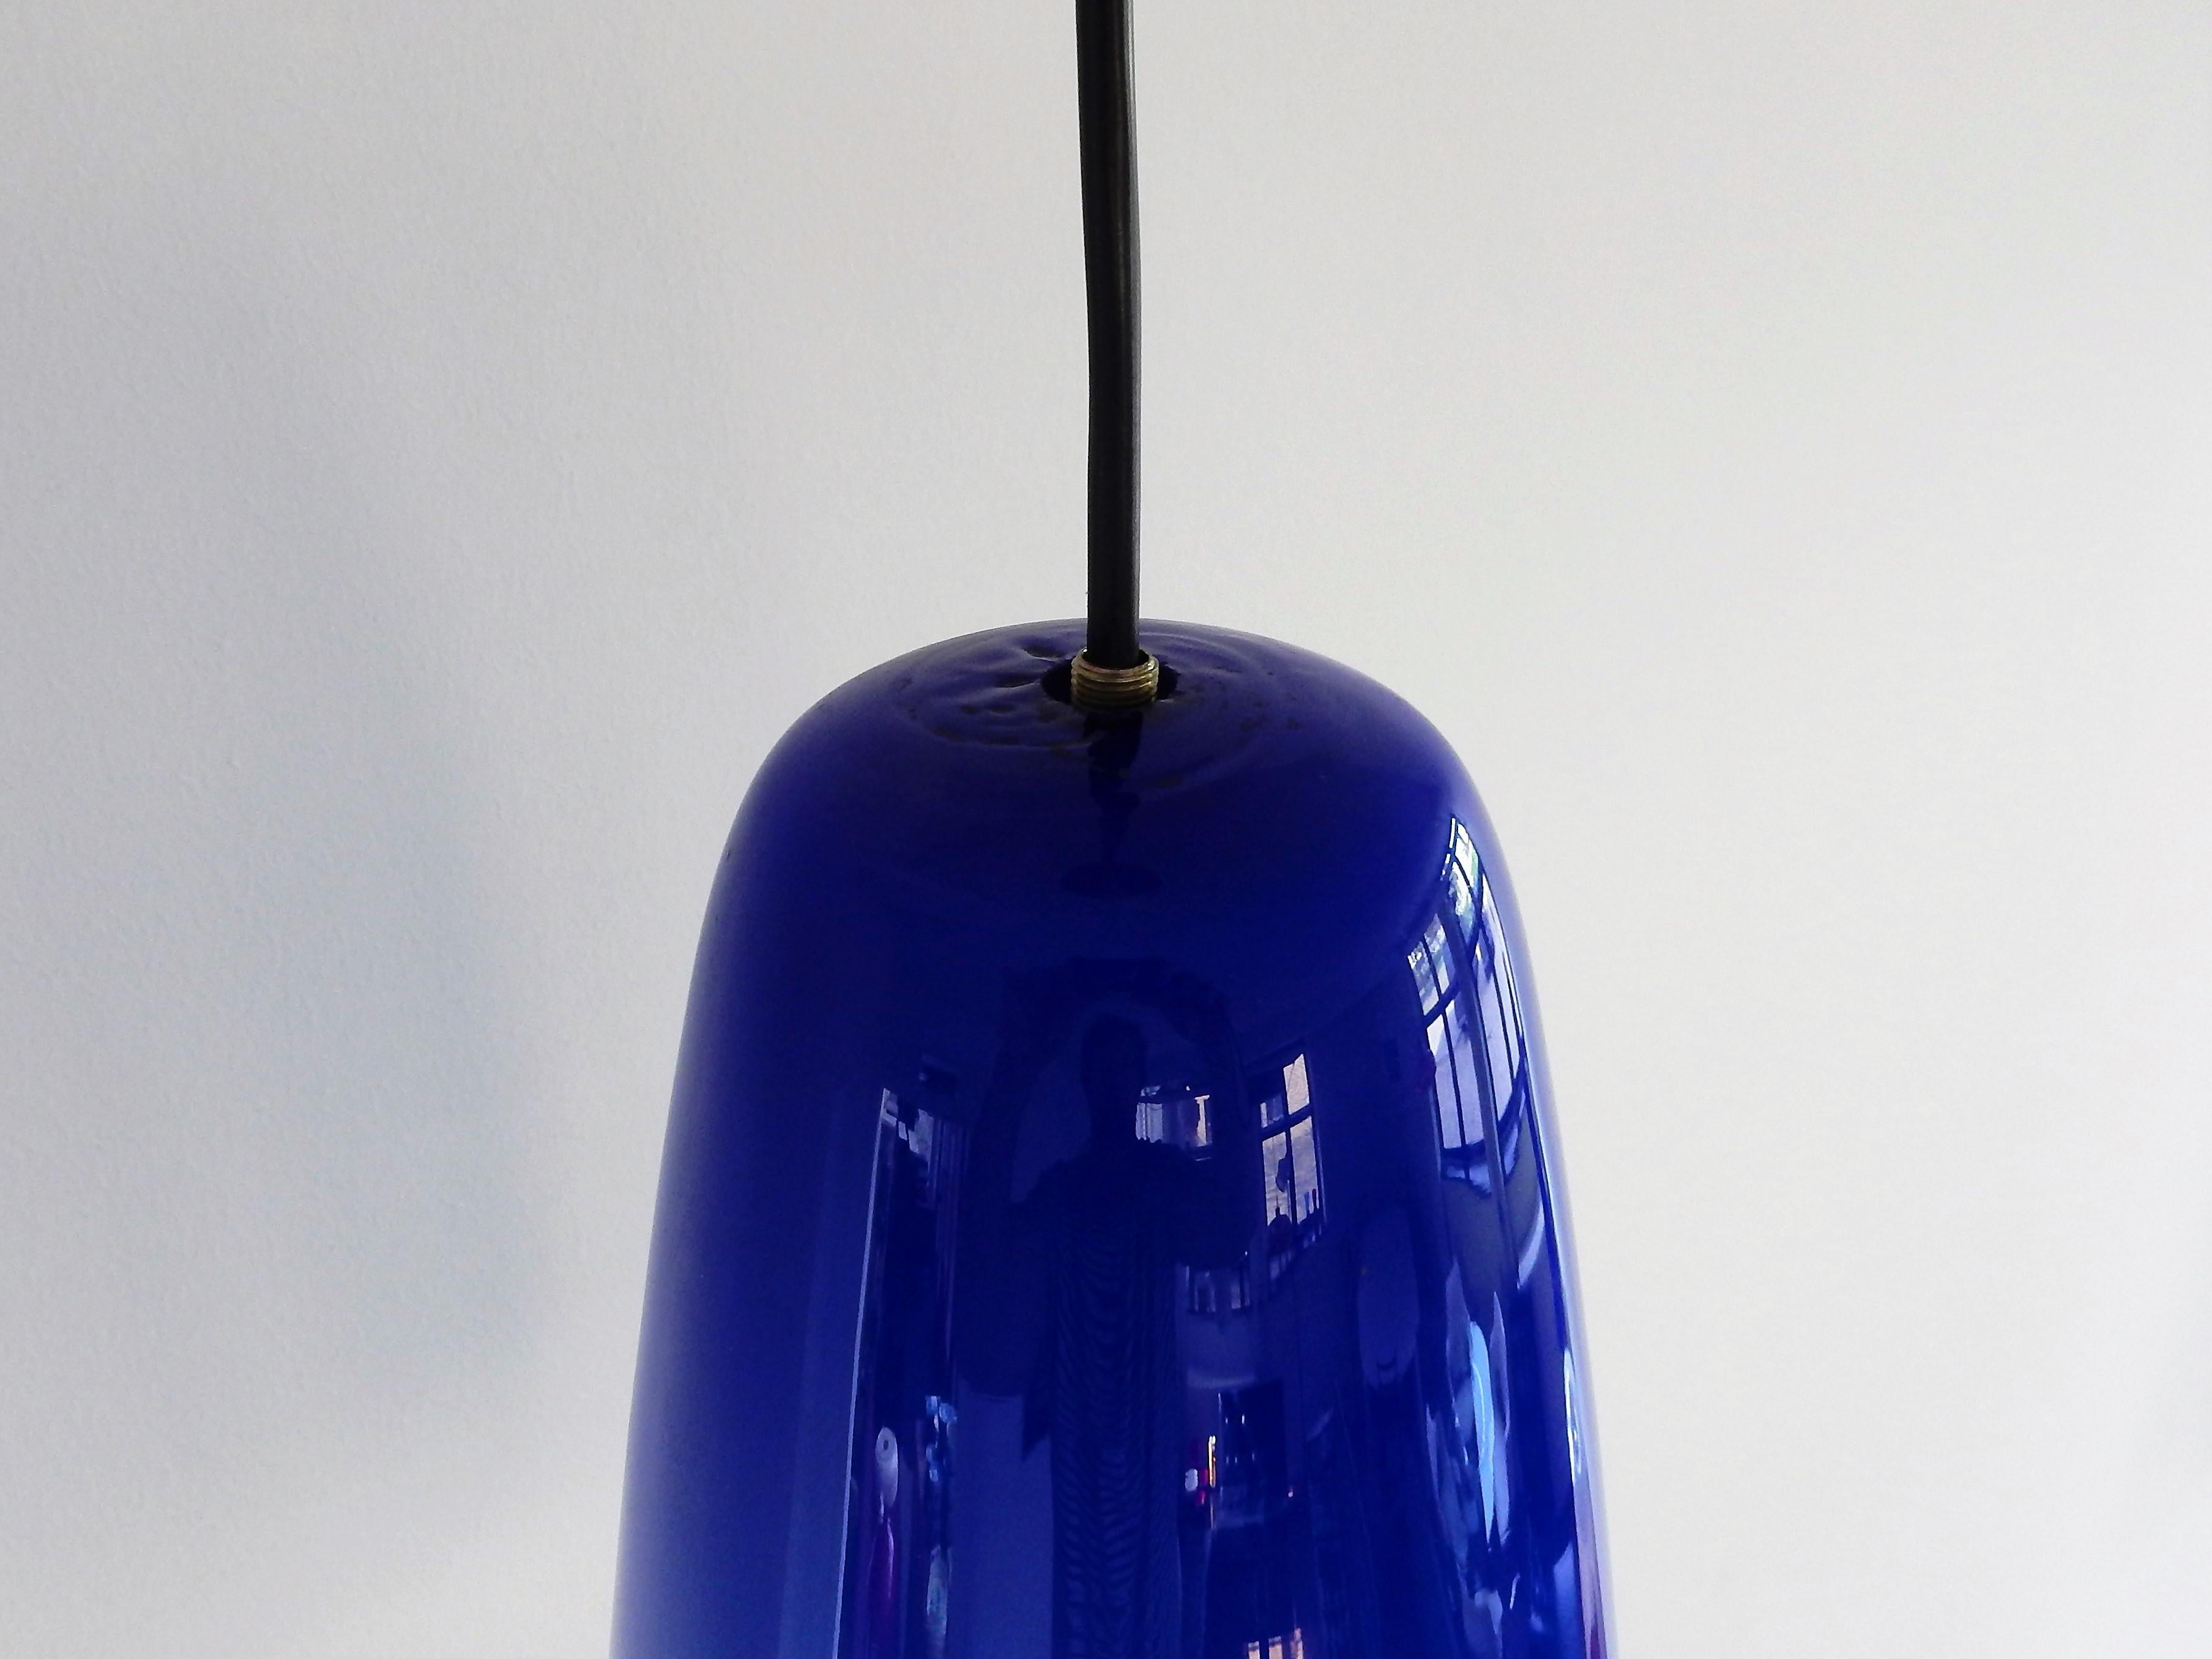 The 'Sigaro' pendant lamp, made of blown Murano glass, was designed in the 1950s by Massimo Vignelli for Venini. Mostly seen with a multicolored shade. This particular one is a rare version that is made of a single color cobalt blue. This lamp is in